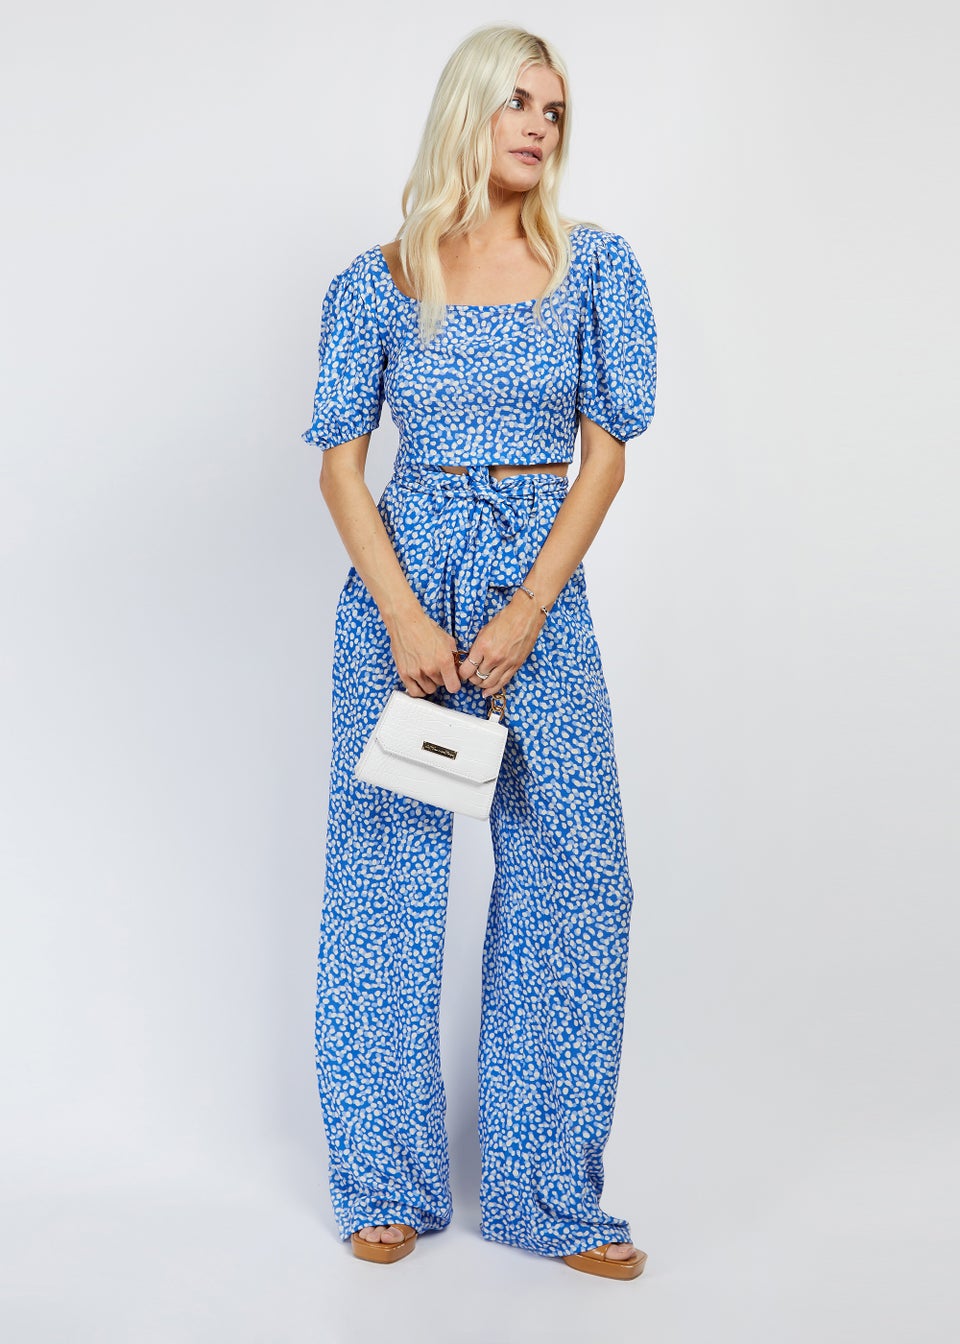 Girls on Film by Dani Dyer Blue Floral Wide Leg Co-Ord Trousers